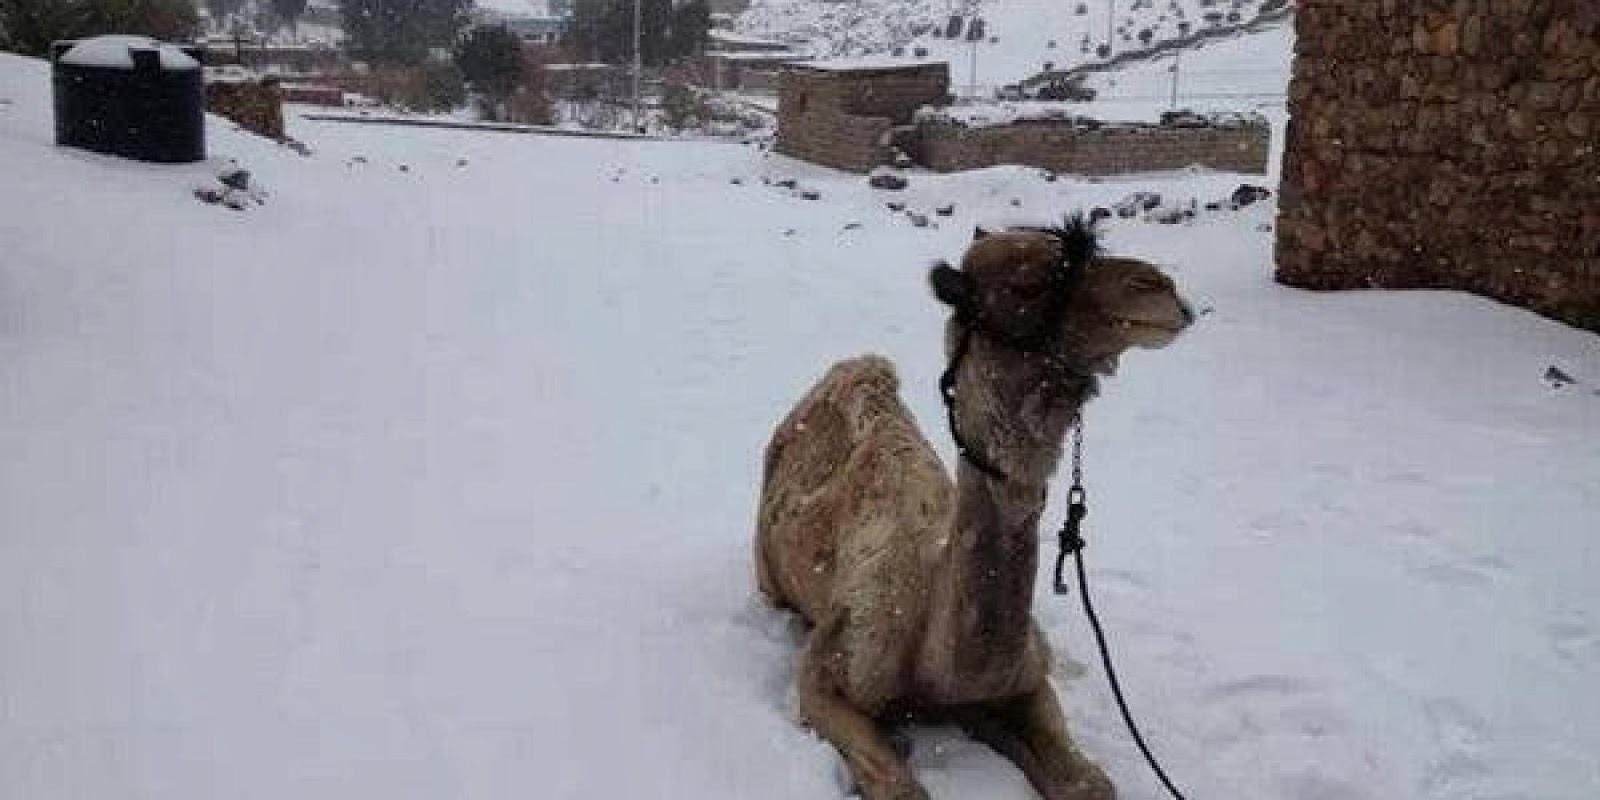 Snow Falls In Cairo For The First Time In More Than 100 Years